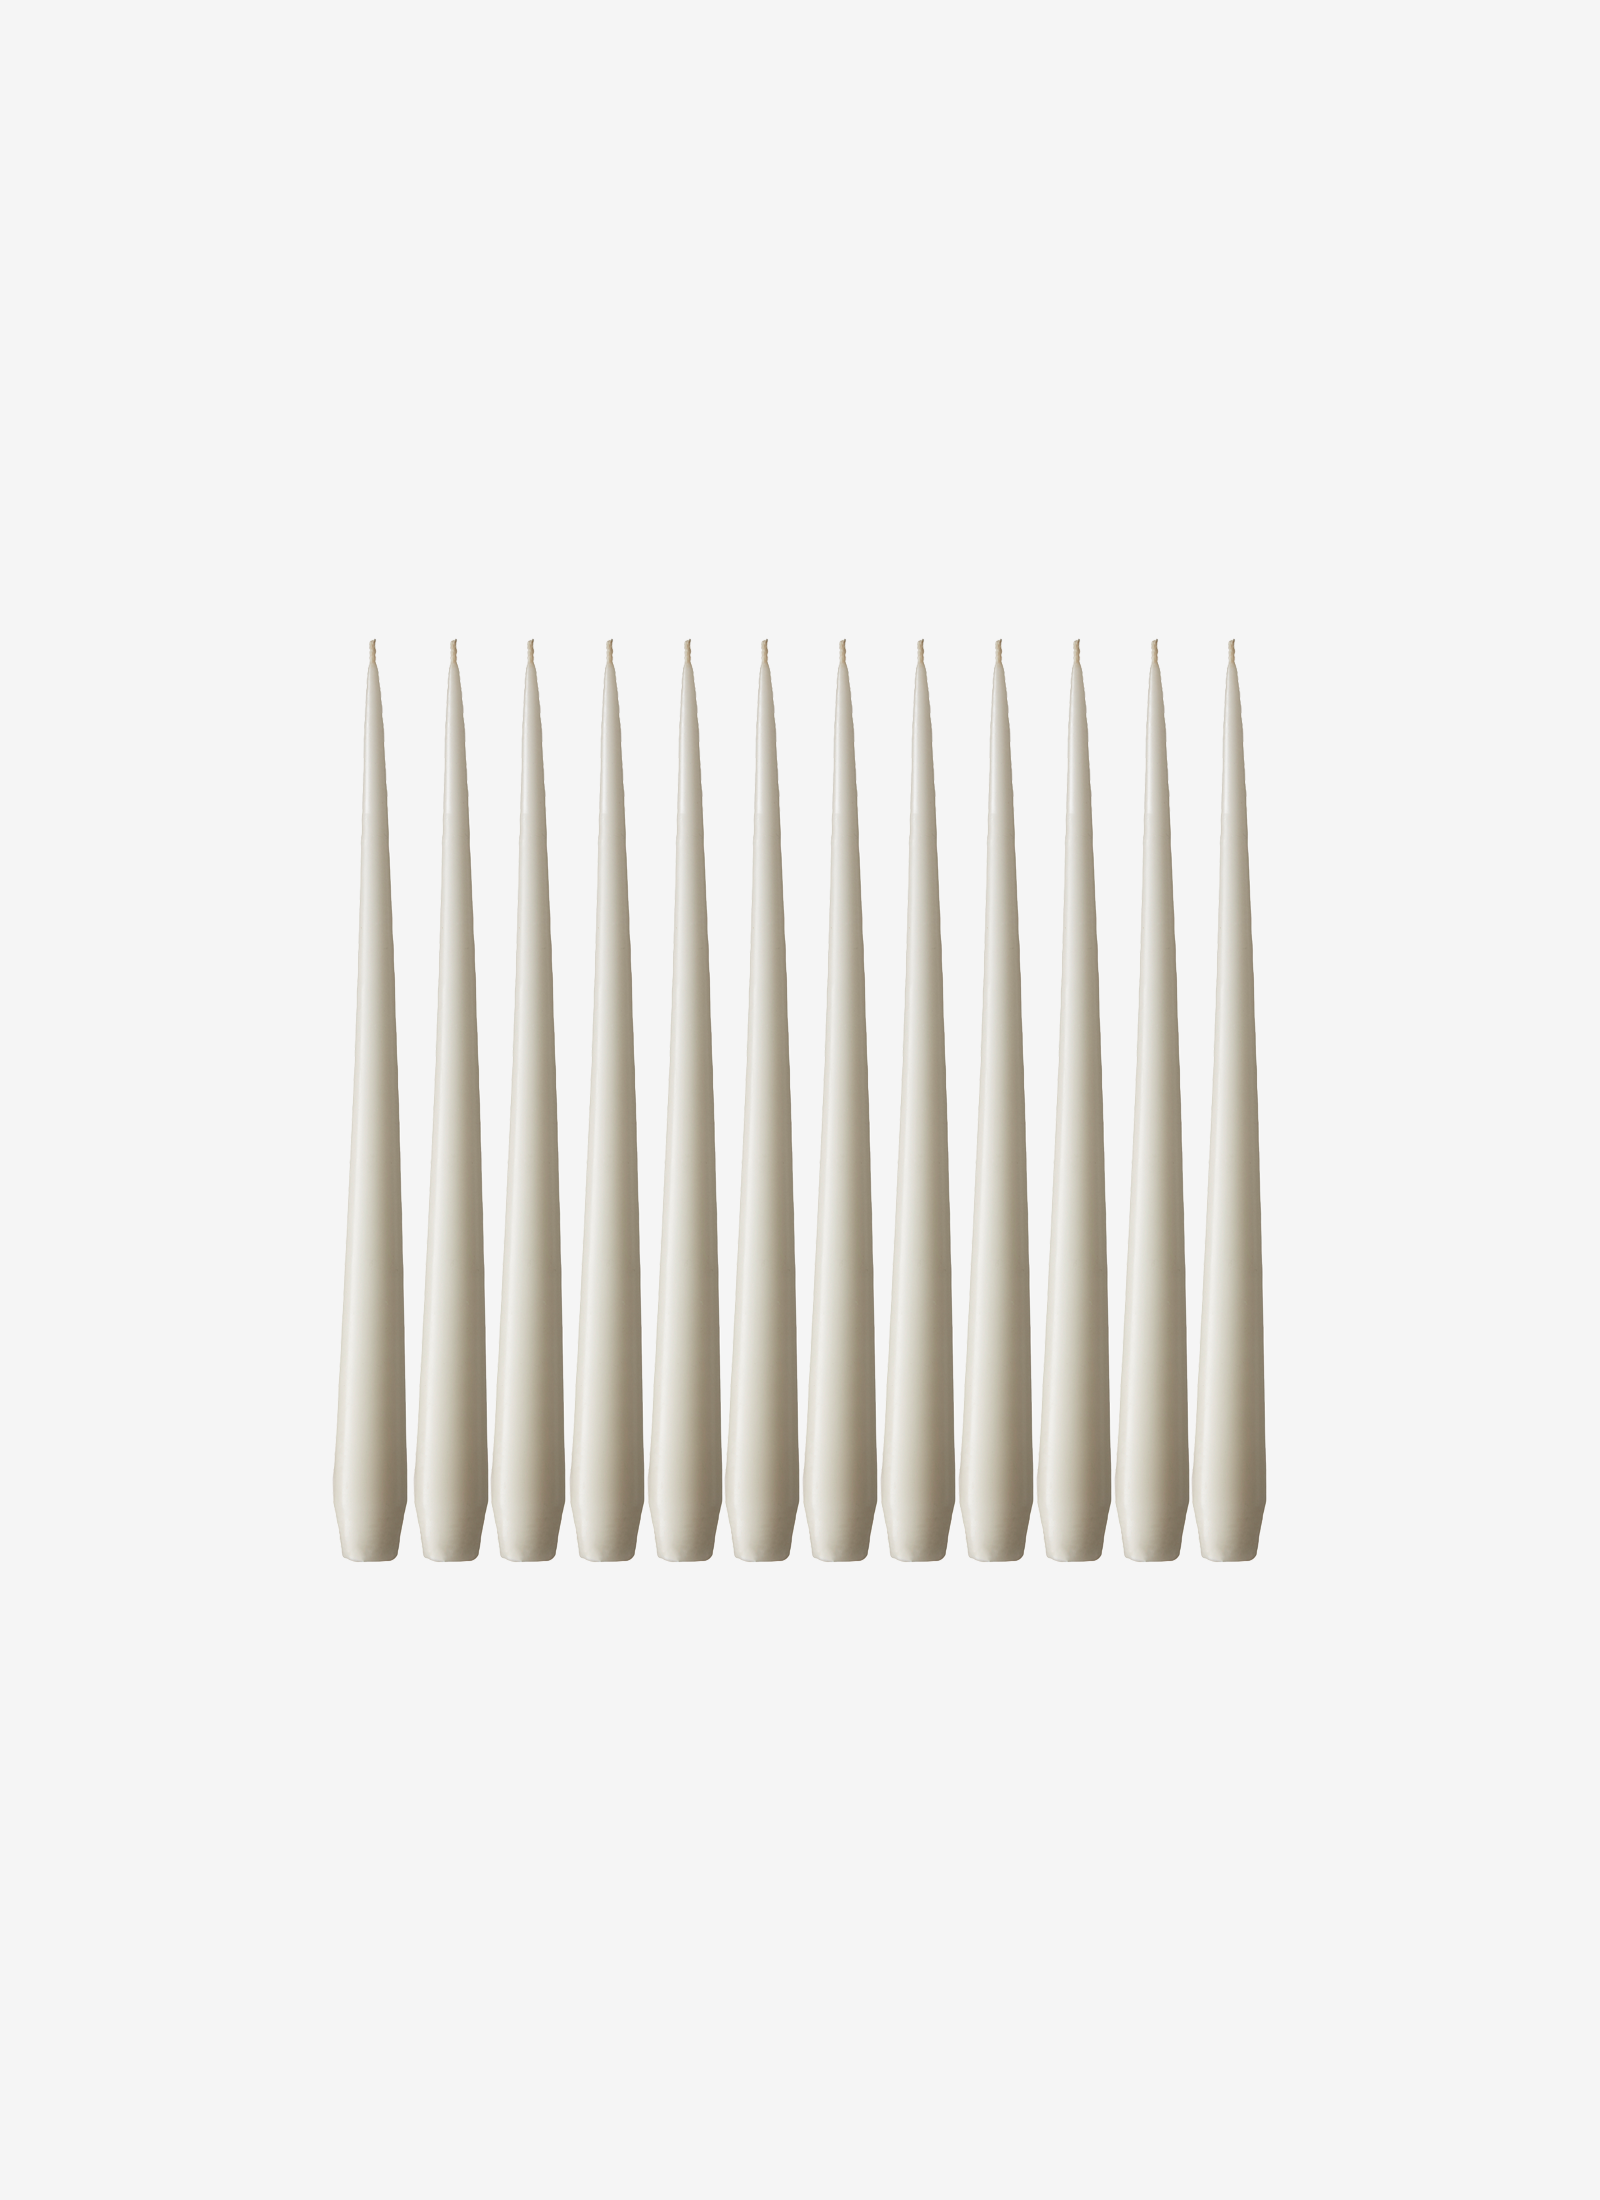 Case of 12 Tapered Candles in Ivory #06 - 32cm